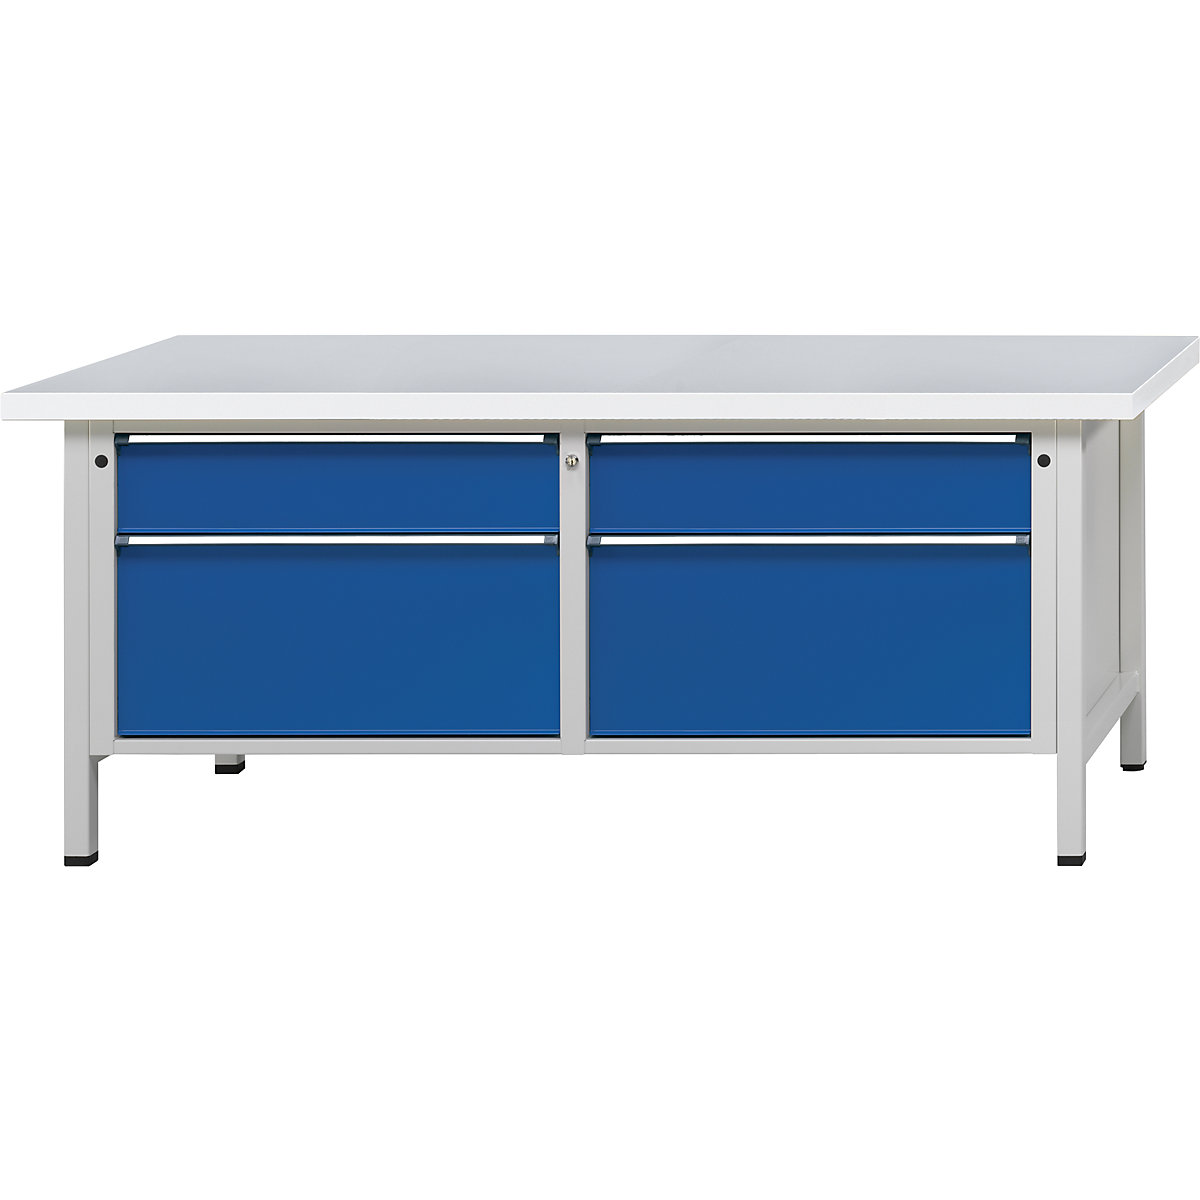 Workbenches 2000 mm wide, frame construction – ANKE, 4 drawers, universal worktop, height 840 mm-7